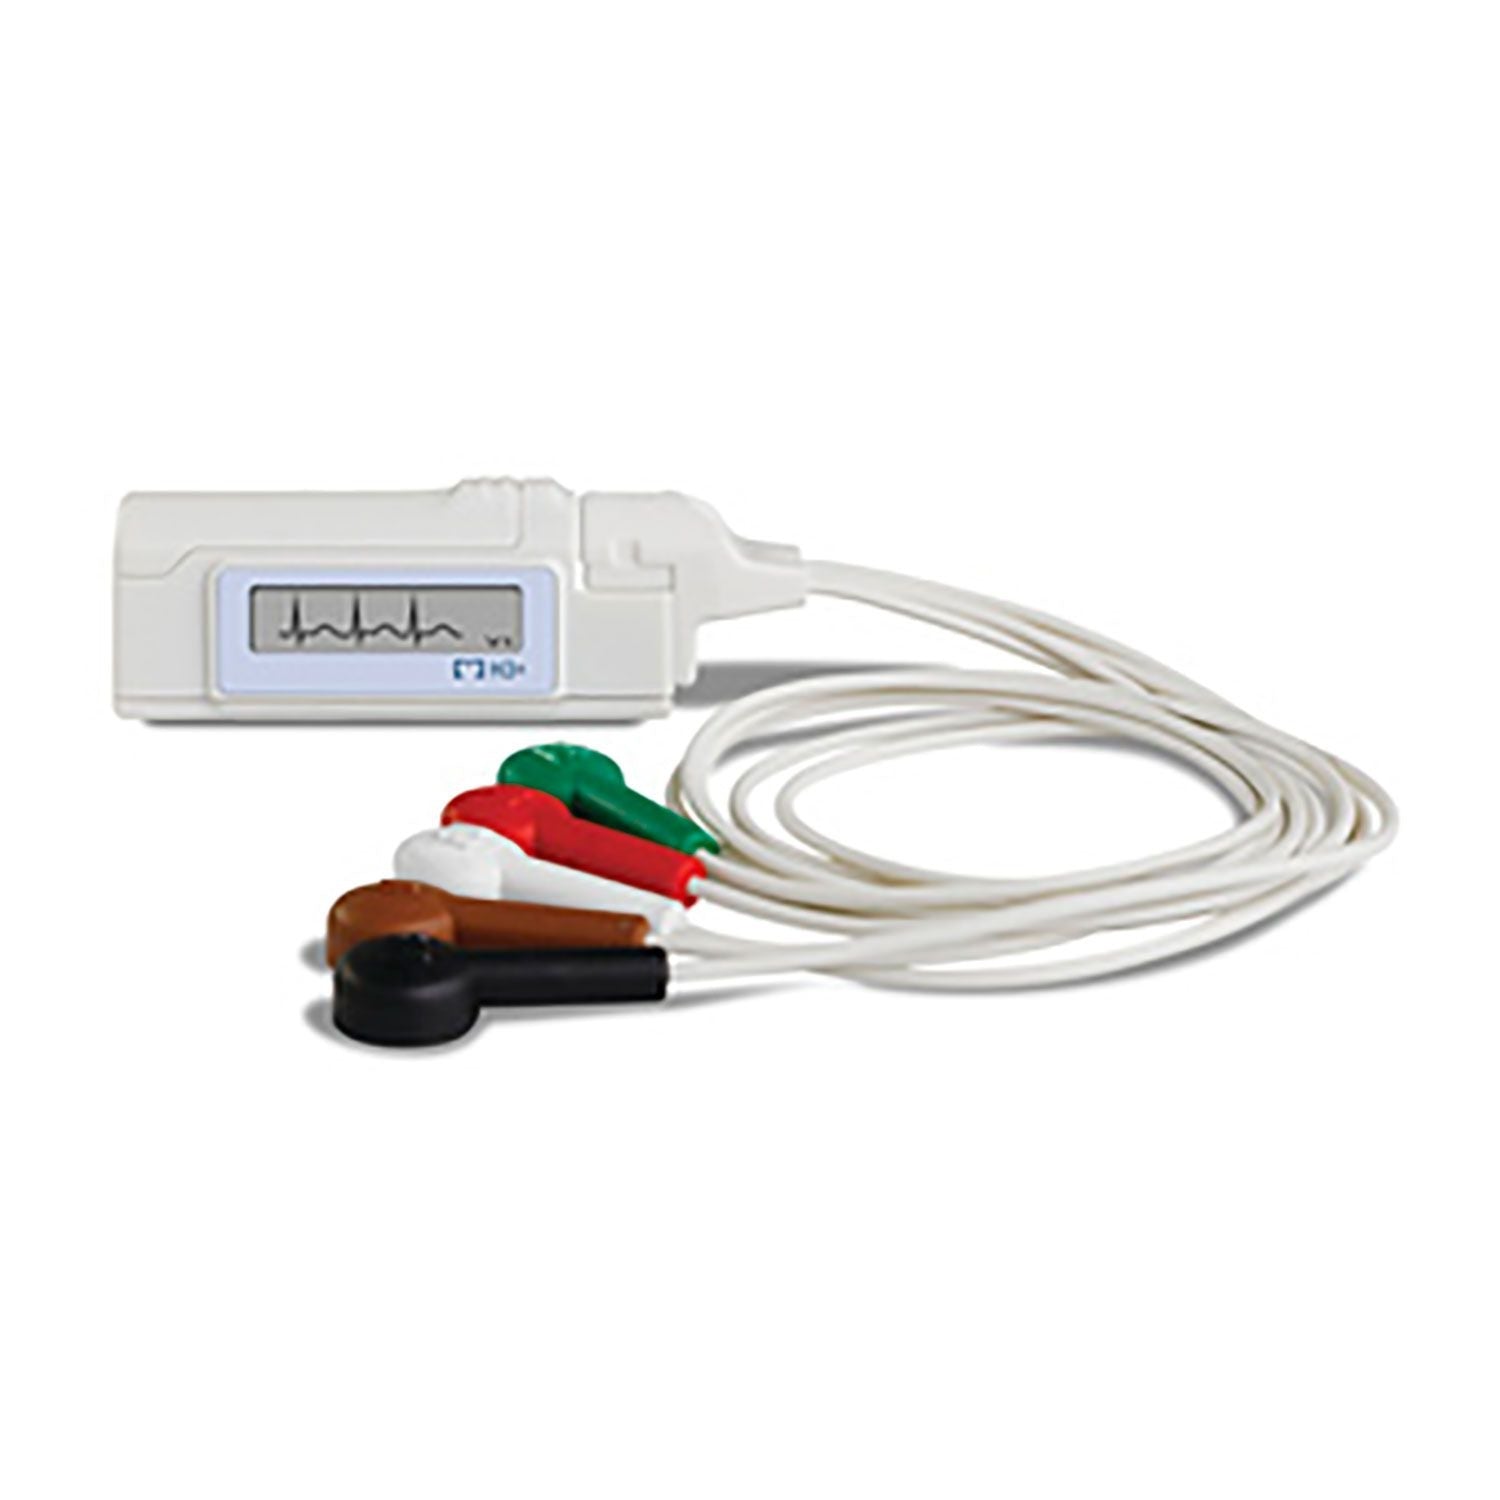 H3+ Holter Recorder | IEC 5-wire, 38cm, patient cable (3-channel), carry case, hookup kit, user